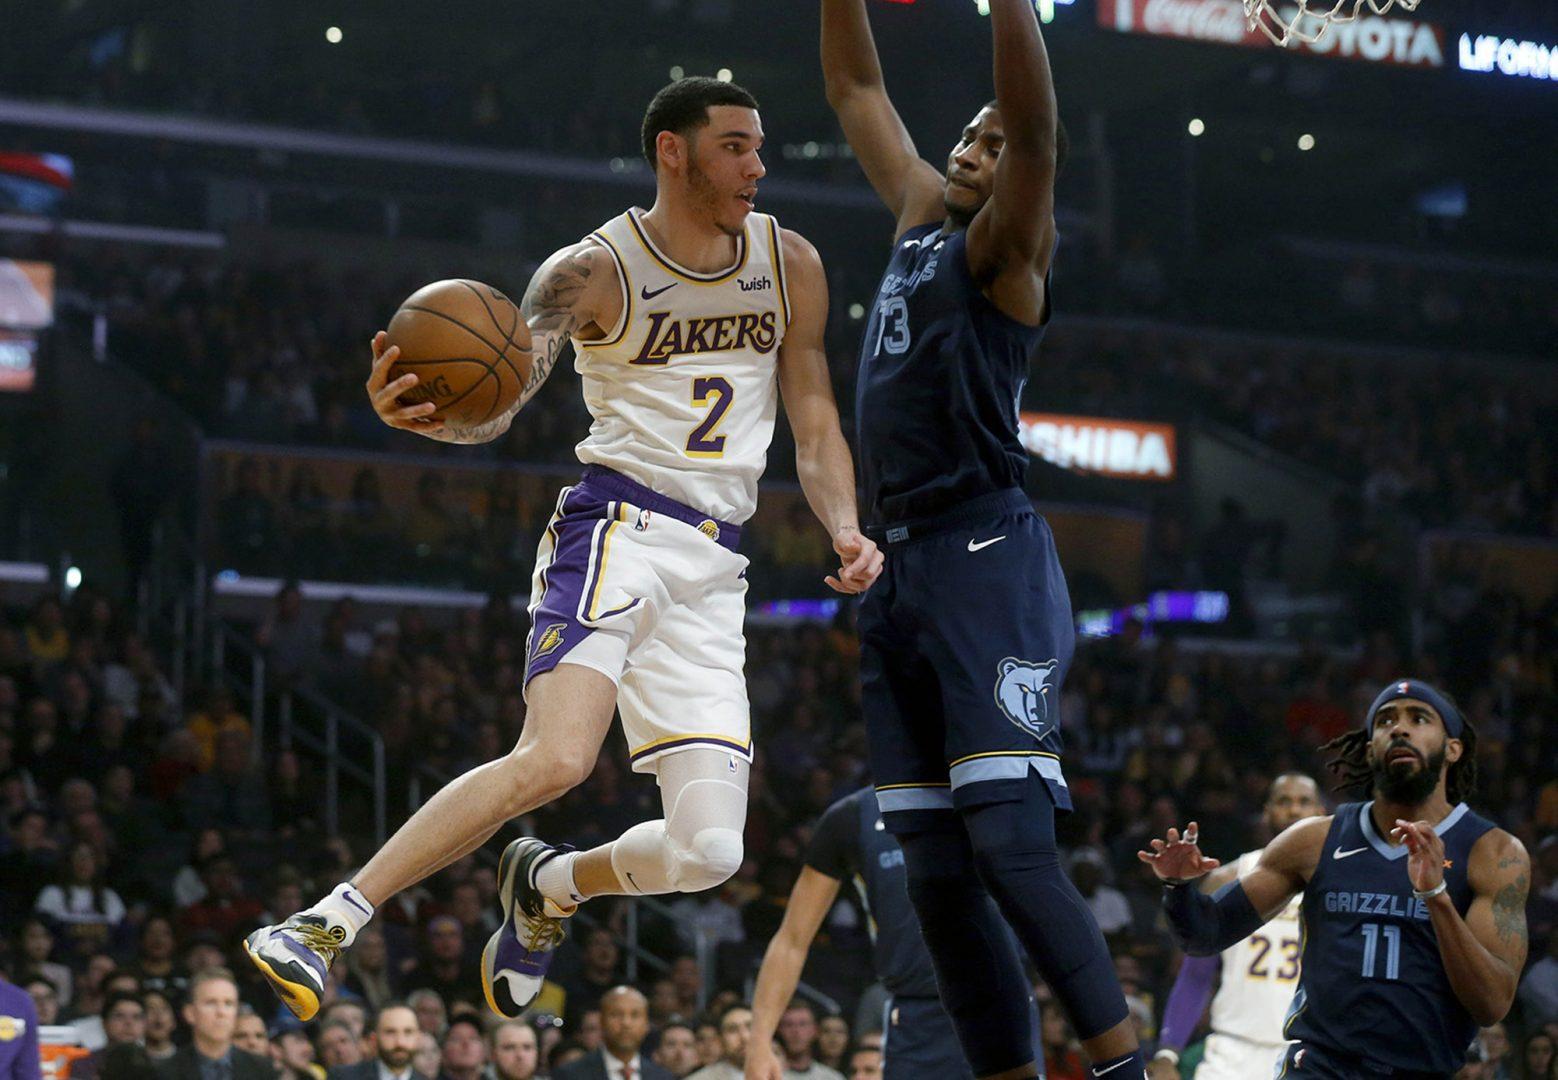 Los Angeles Lakers guard Lonzo Ball (2) attempts a pass while guarded by Memphis Grizzlies forward Jaren Jackson Jr. (13) on December 23, 2018, at Staples Center in Los Angeles. (Gary Coronado/Los Angeles Times/TNS)